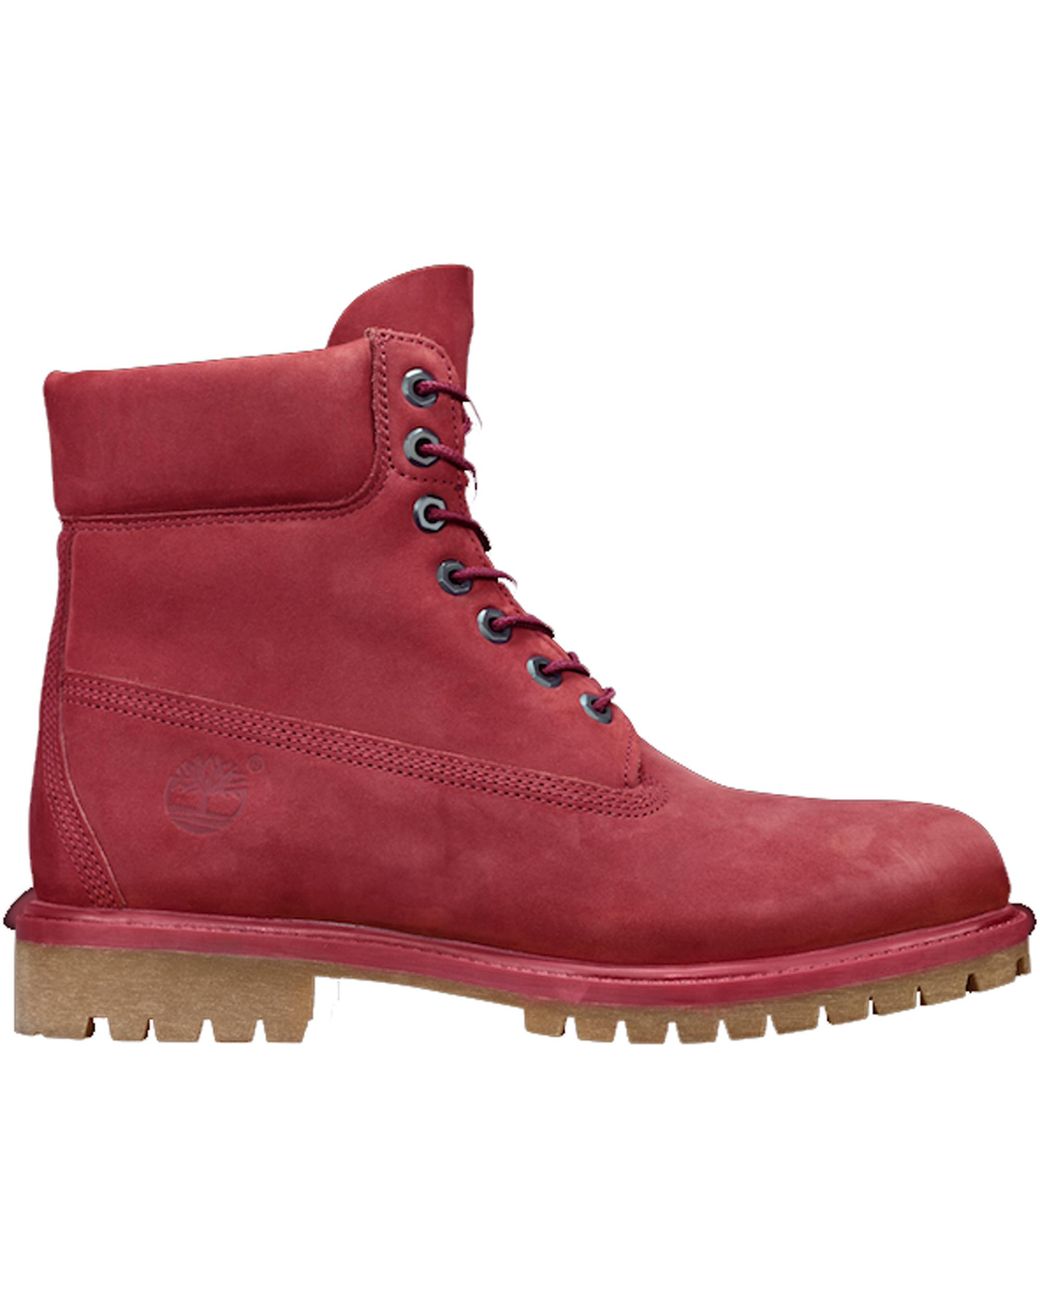 burgundy red timberland boots